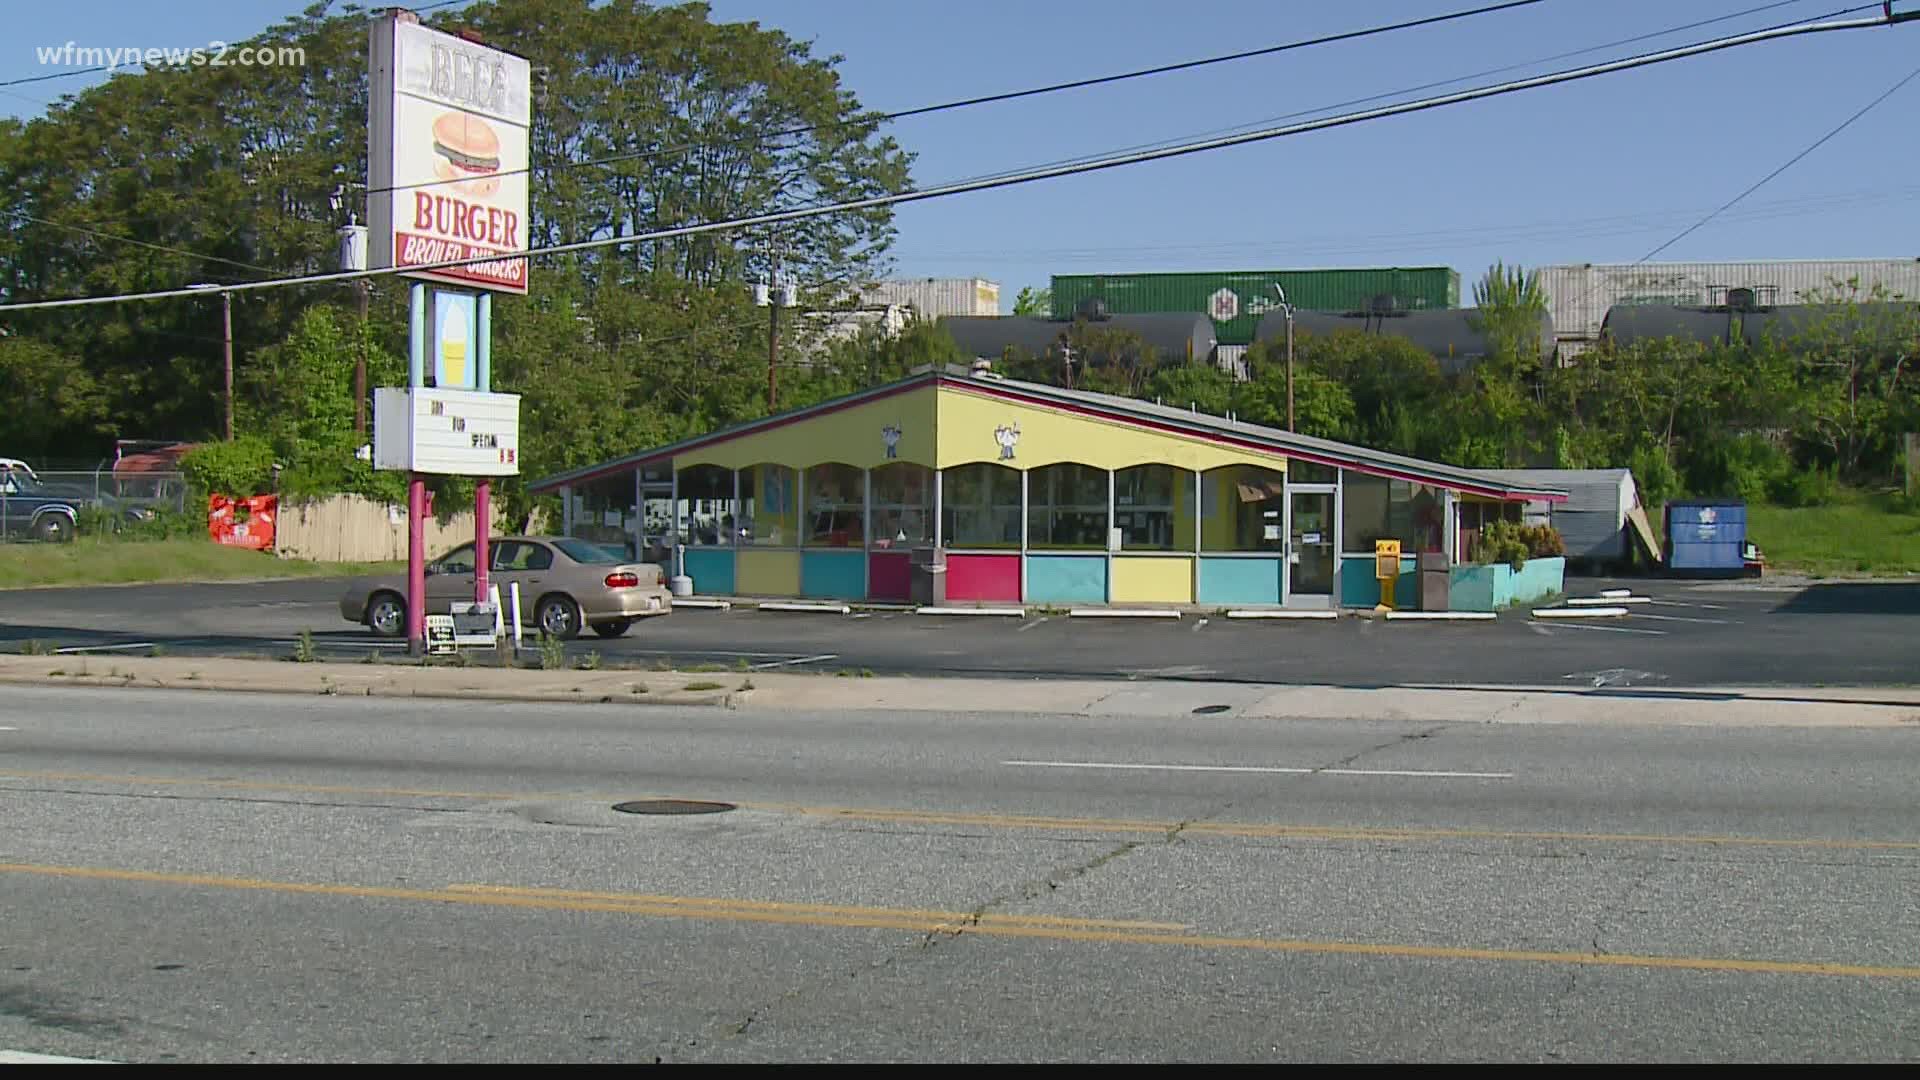 Rumors started online saying the long-time Greensboro burger shop was closing at the end of the day Monday.